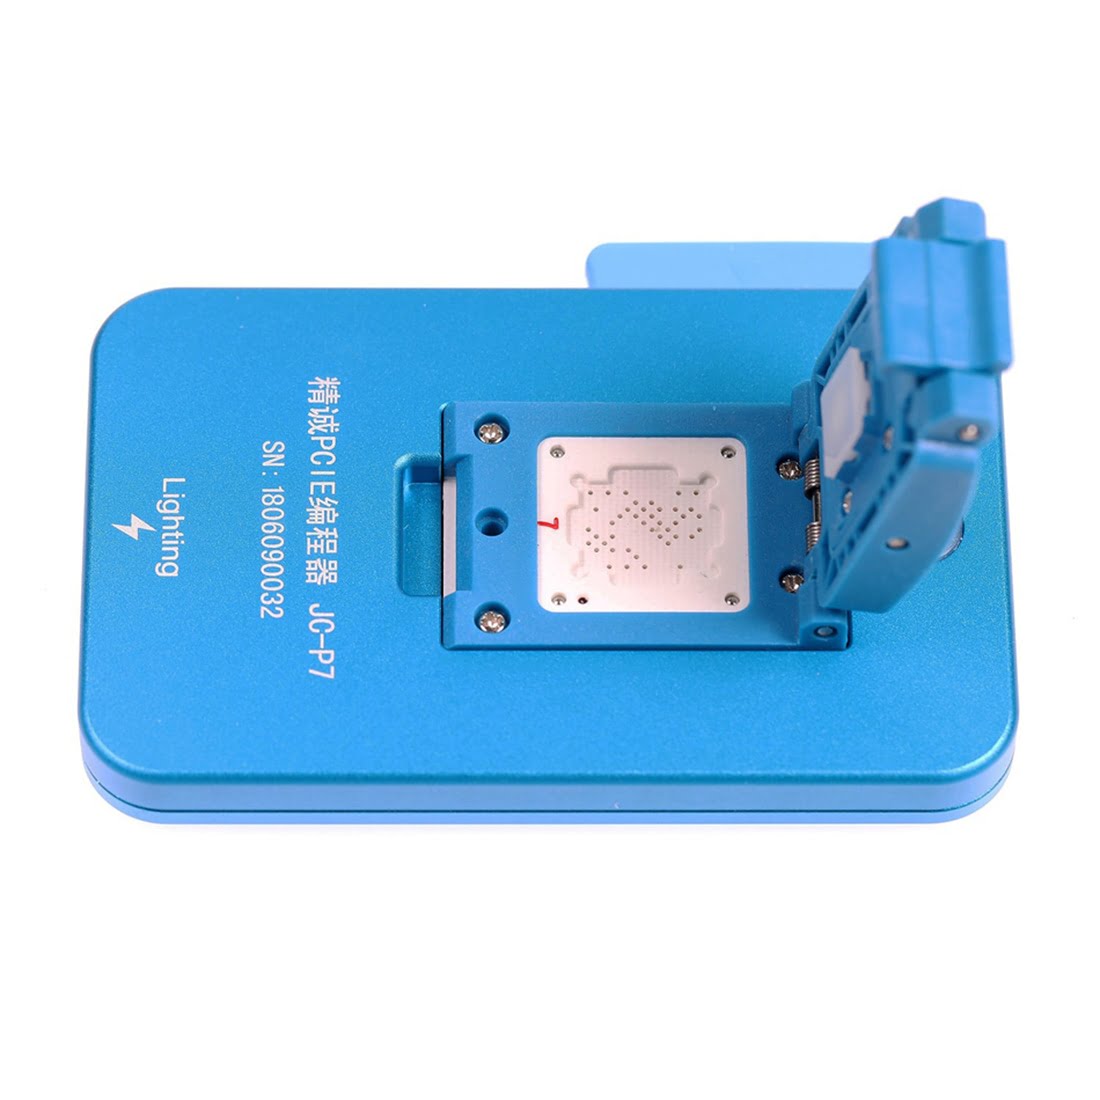 JC Pro1000S Multi-Function HDD NAND Programmer JC P7 NAND Read Write Error Remove For iPhone 5SE 6S 6SP 7 7P iPad Pro